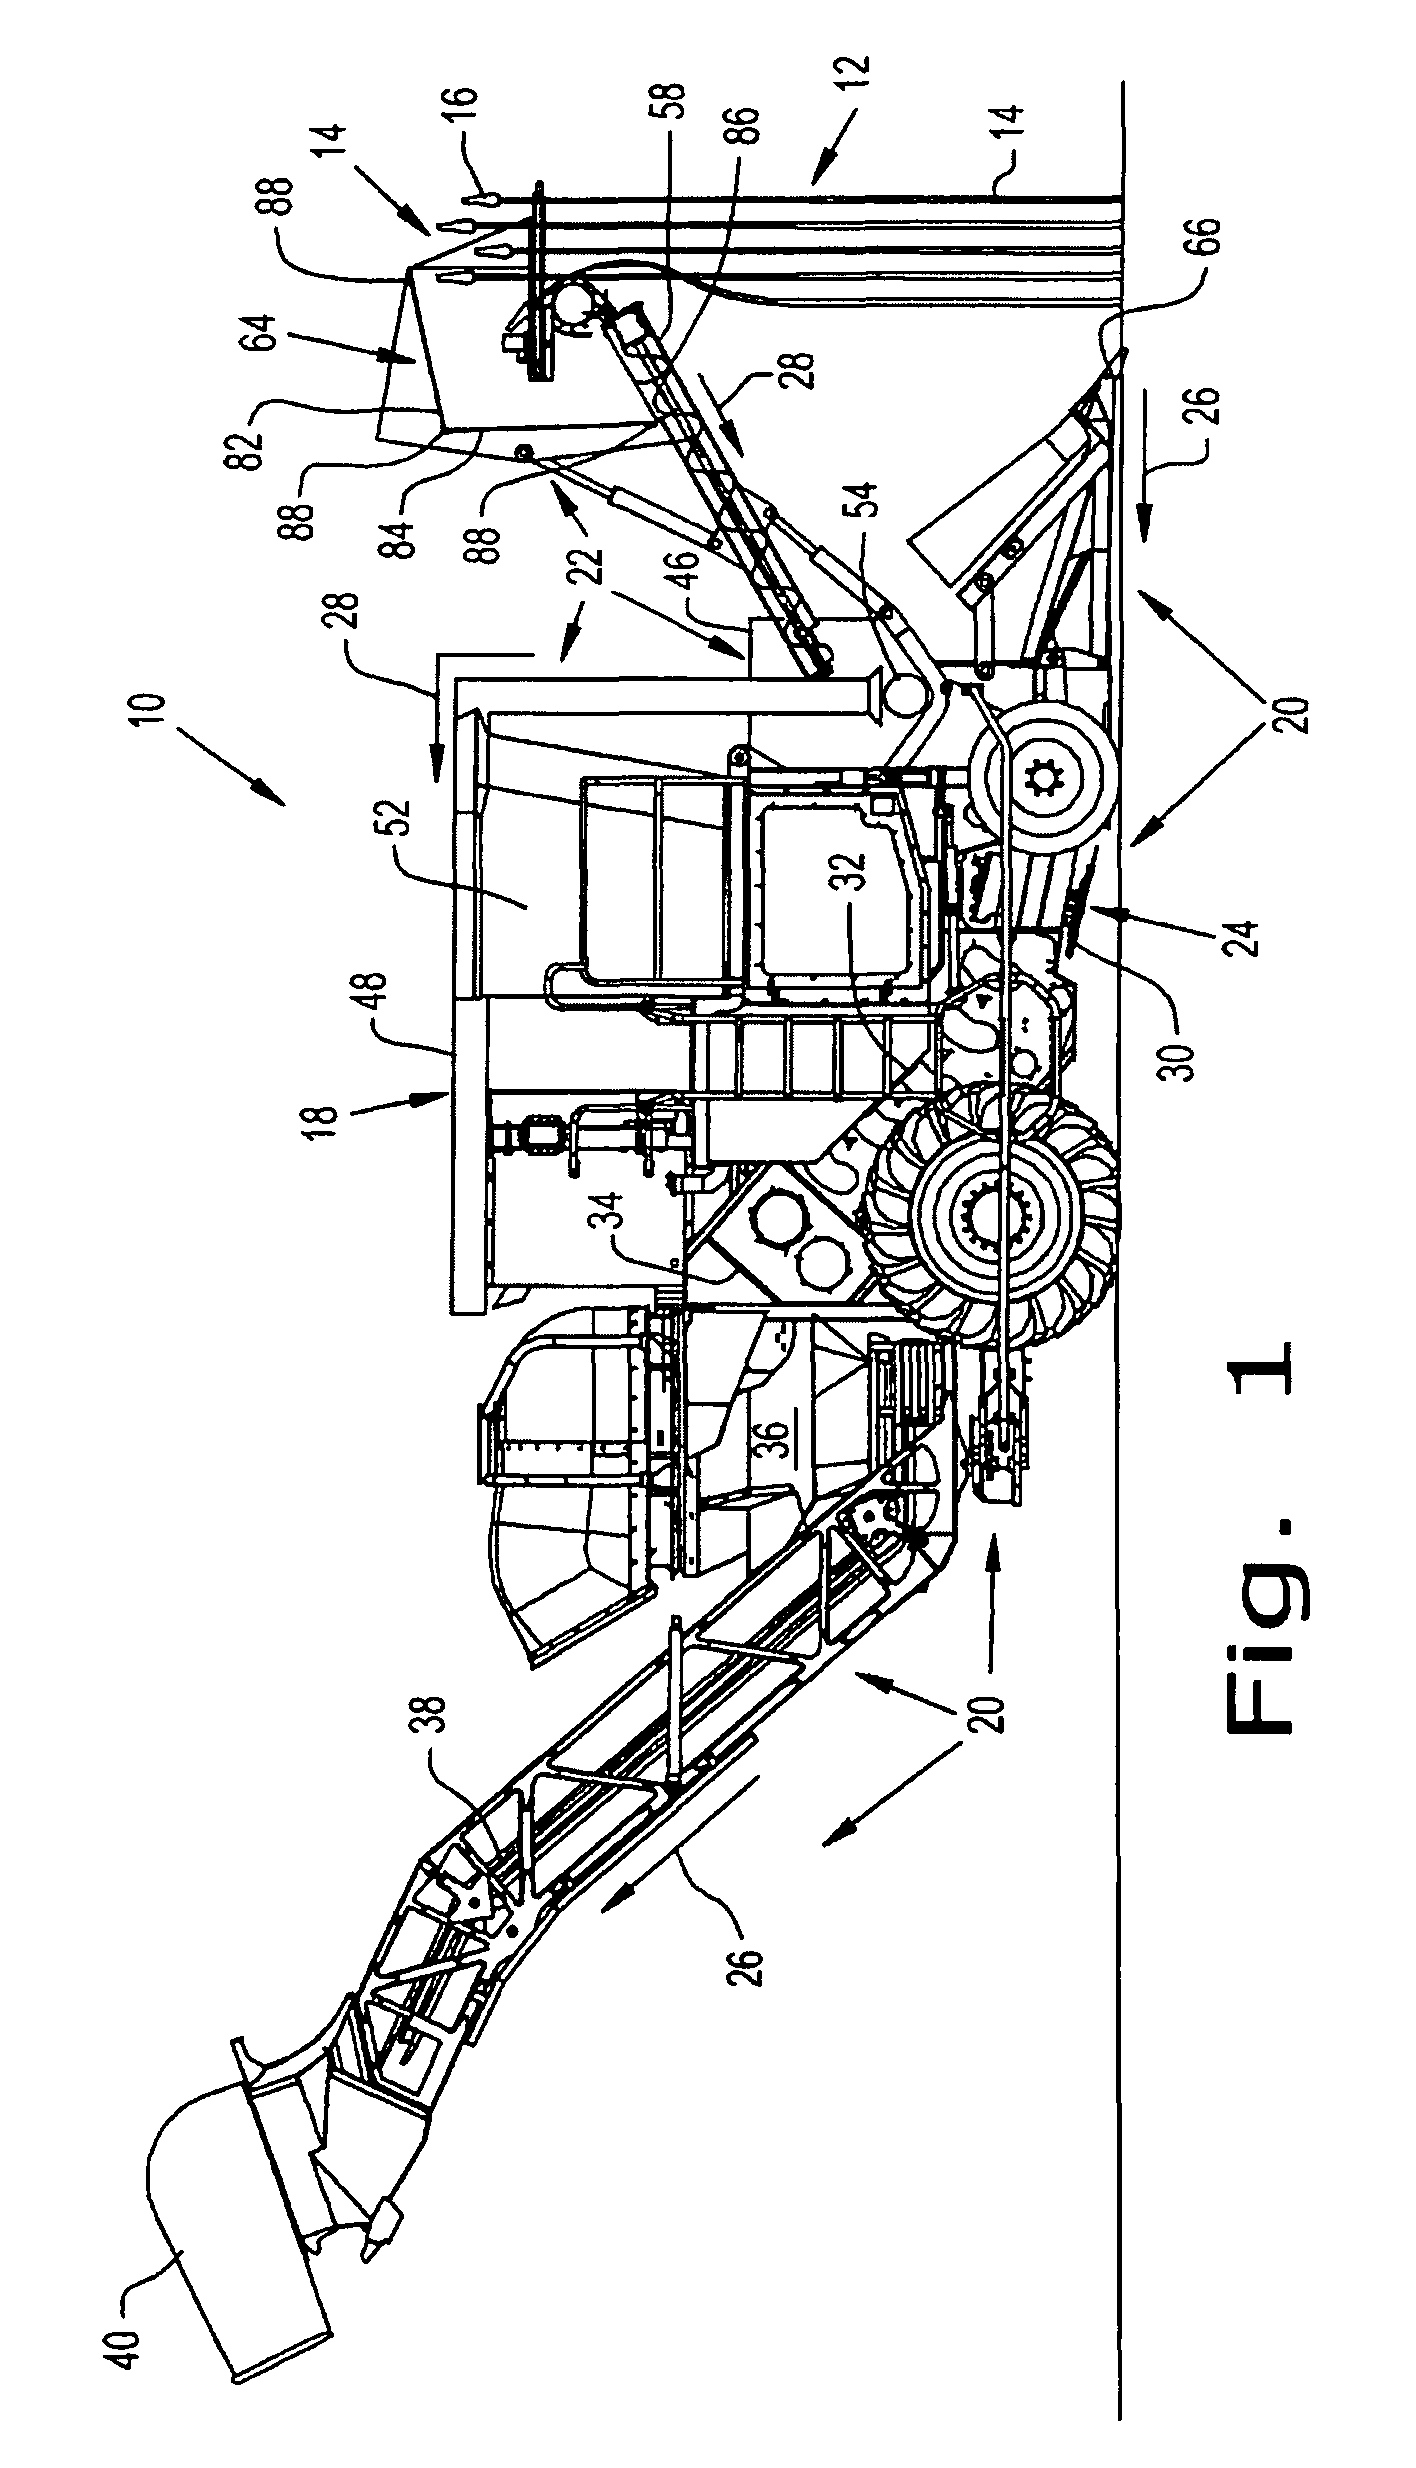 Seed gathering device for use by an agricultural harvester